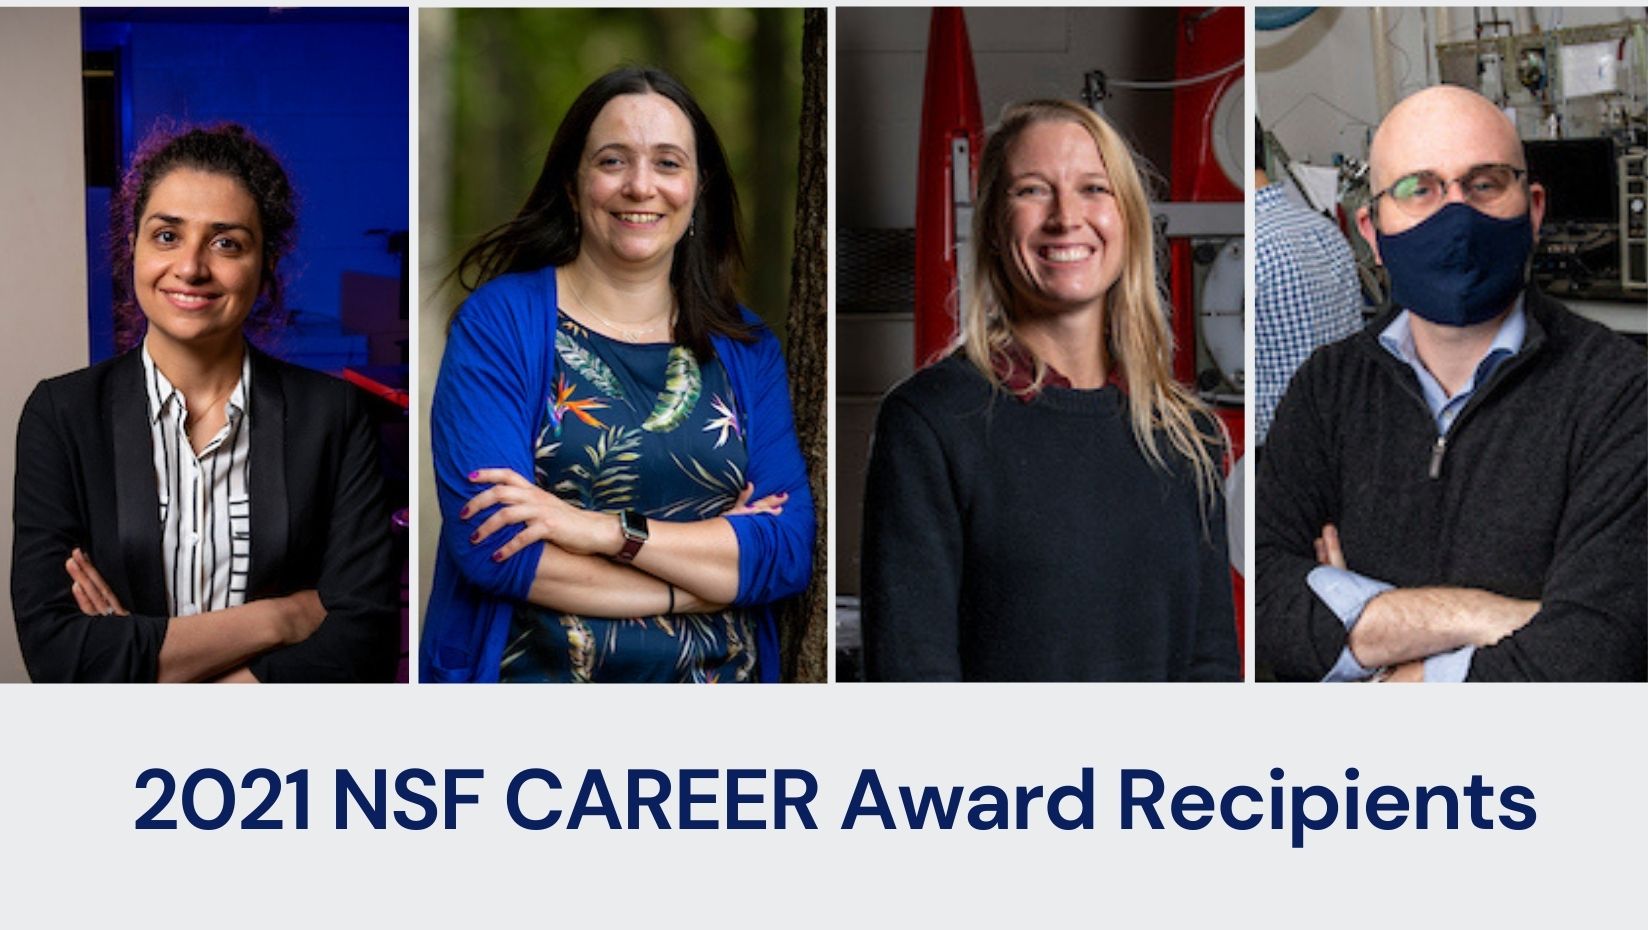 featured image for UMaine celebrates highest number of NSF CAREER Award Recipients in 2021